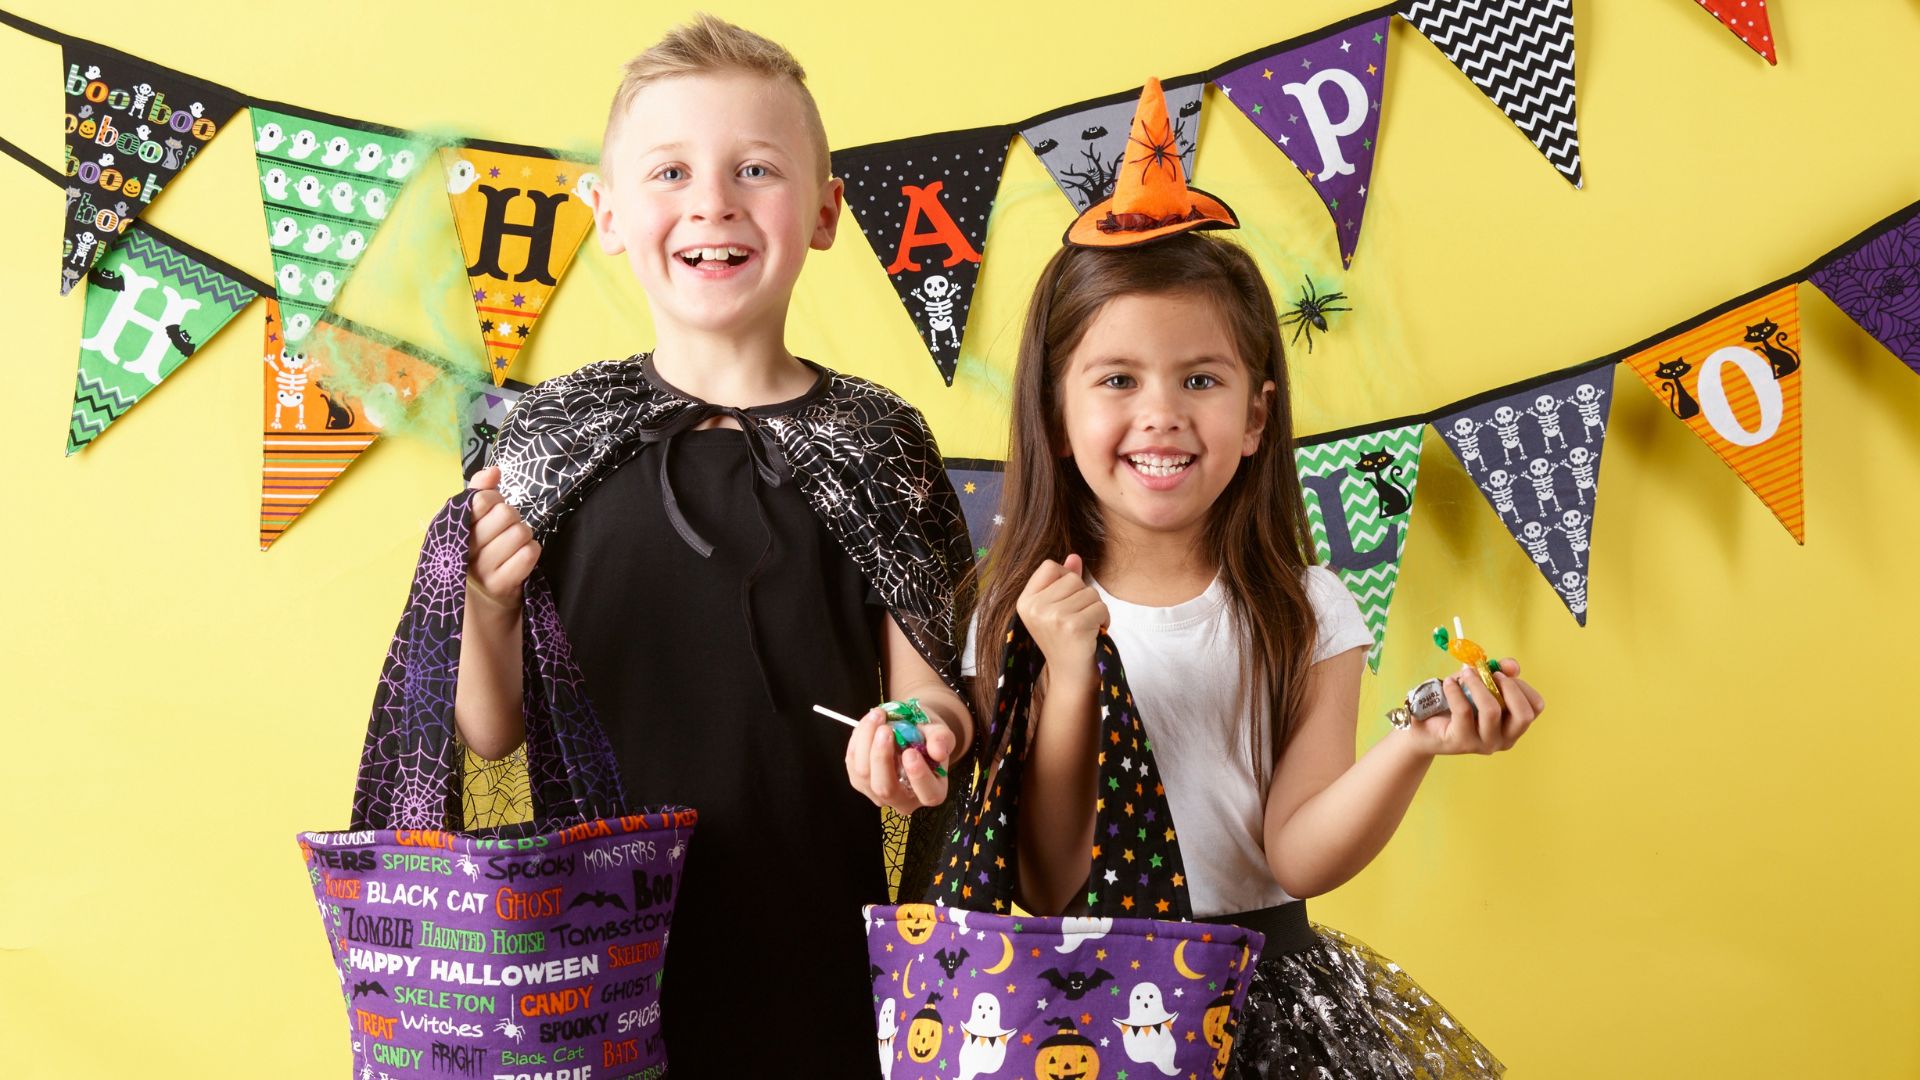 Six Spooktacular Halloween Crafts & Projects To Try Your Hand At This Spooky Season